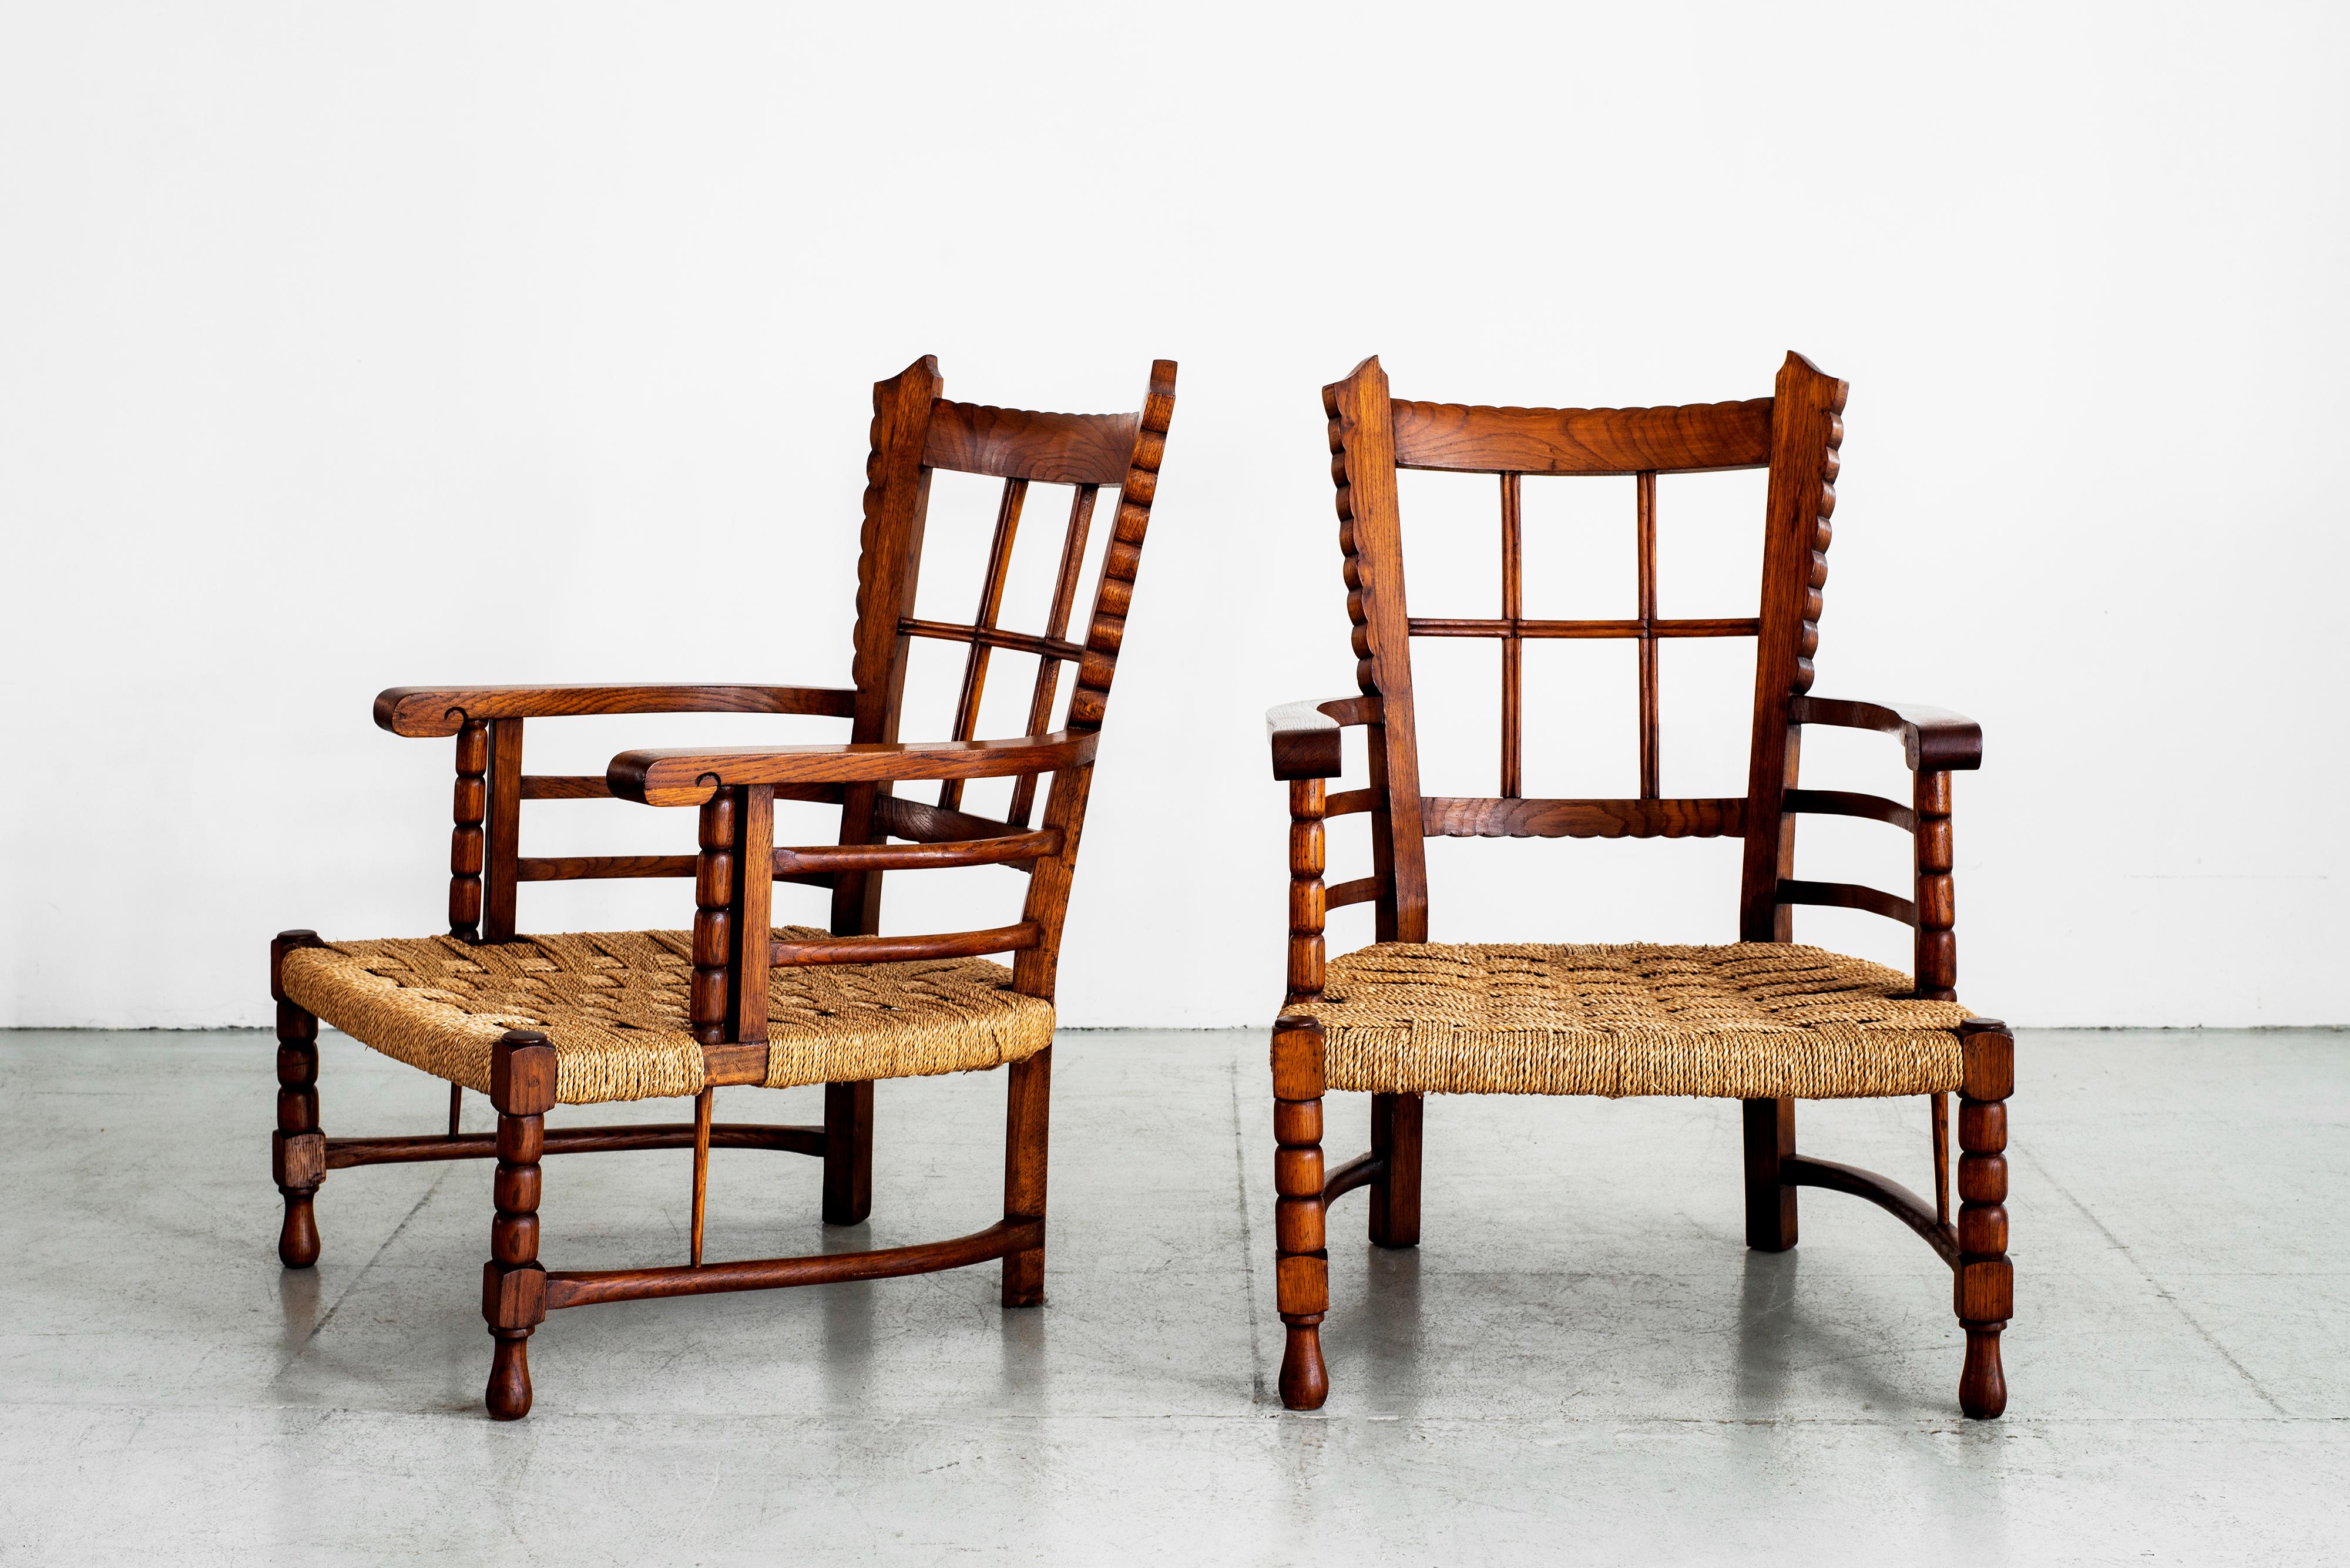 Fantastic pair of Charles Dudouyt chairs with low rushed seats and beautiful carved oak
Scalloped carved edges throughout the chairs with ornate detail.
  